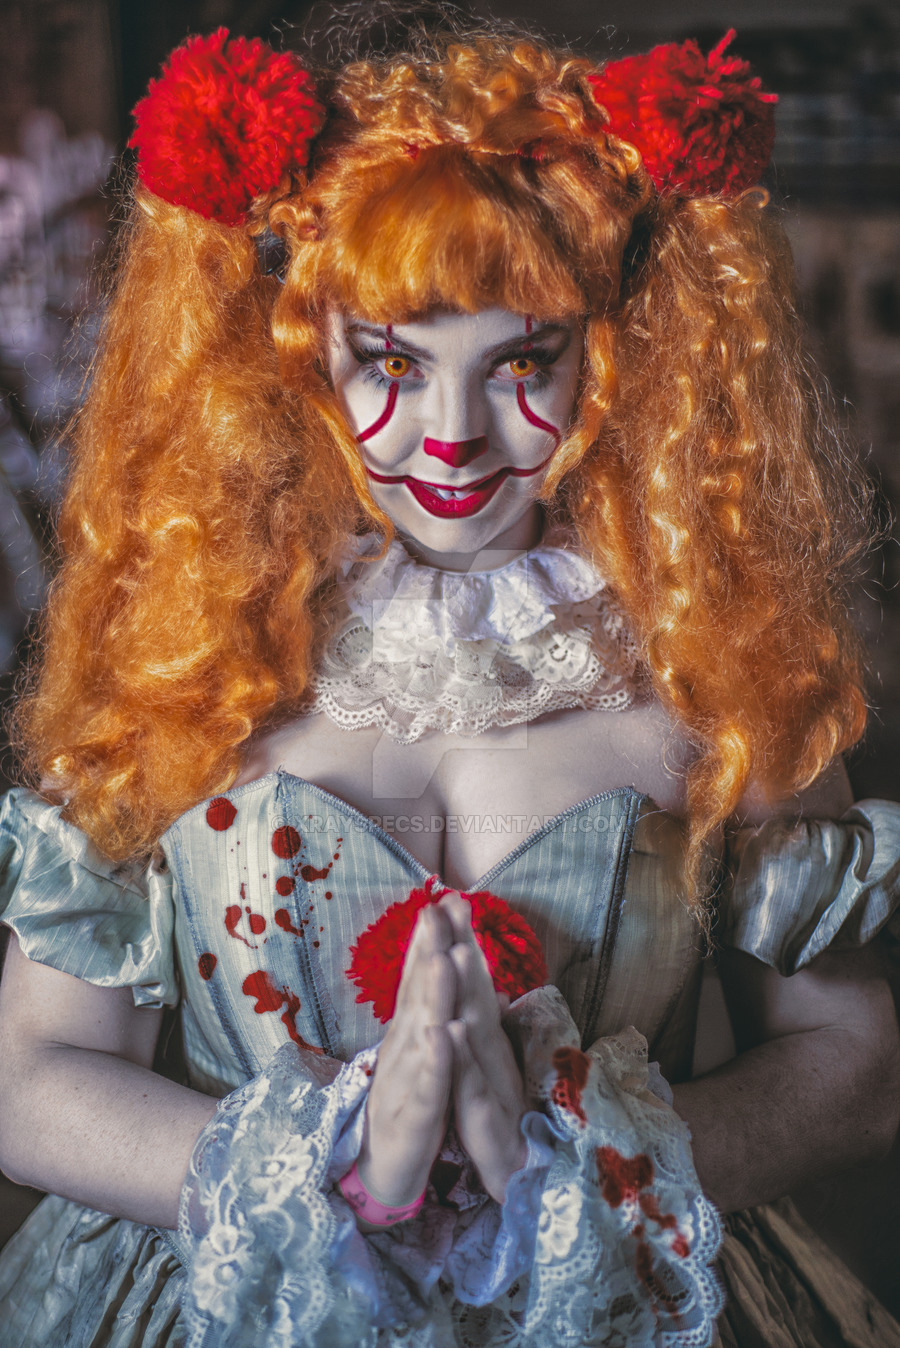 te_elle_cosplay_as_pennywise_from_it_by_xrayspecs-dd5l547